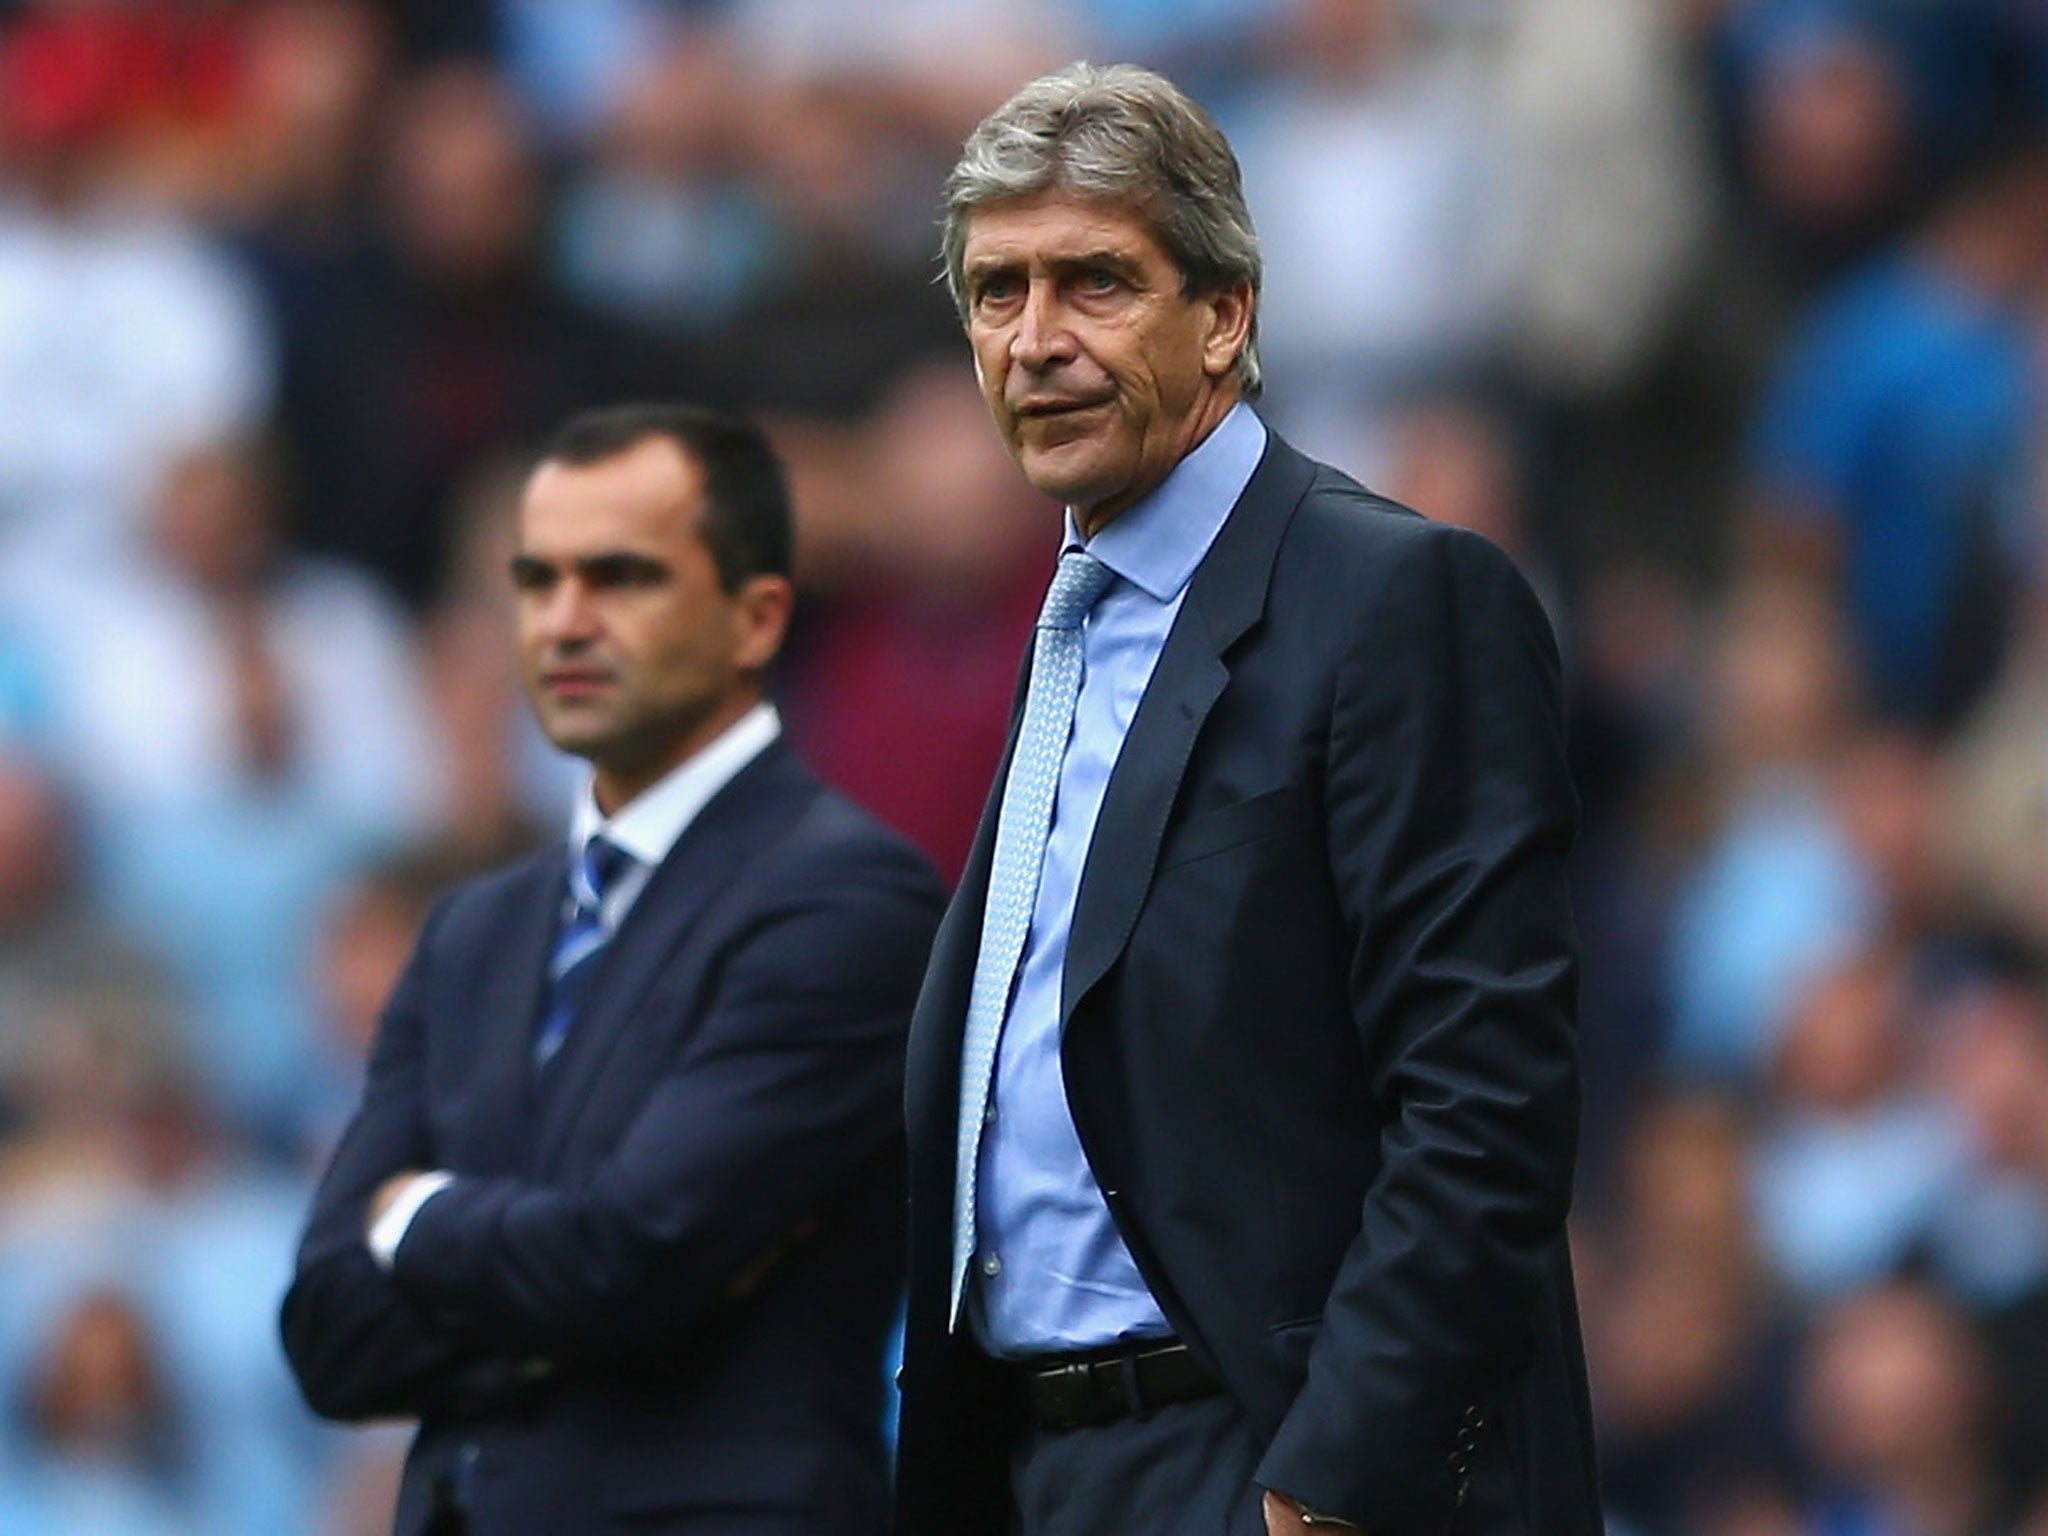 Manuel Pellegrini (right) looks on from the touchline during Manchester City's 3-1 win over Roberto Martinez's (left) Everton